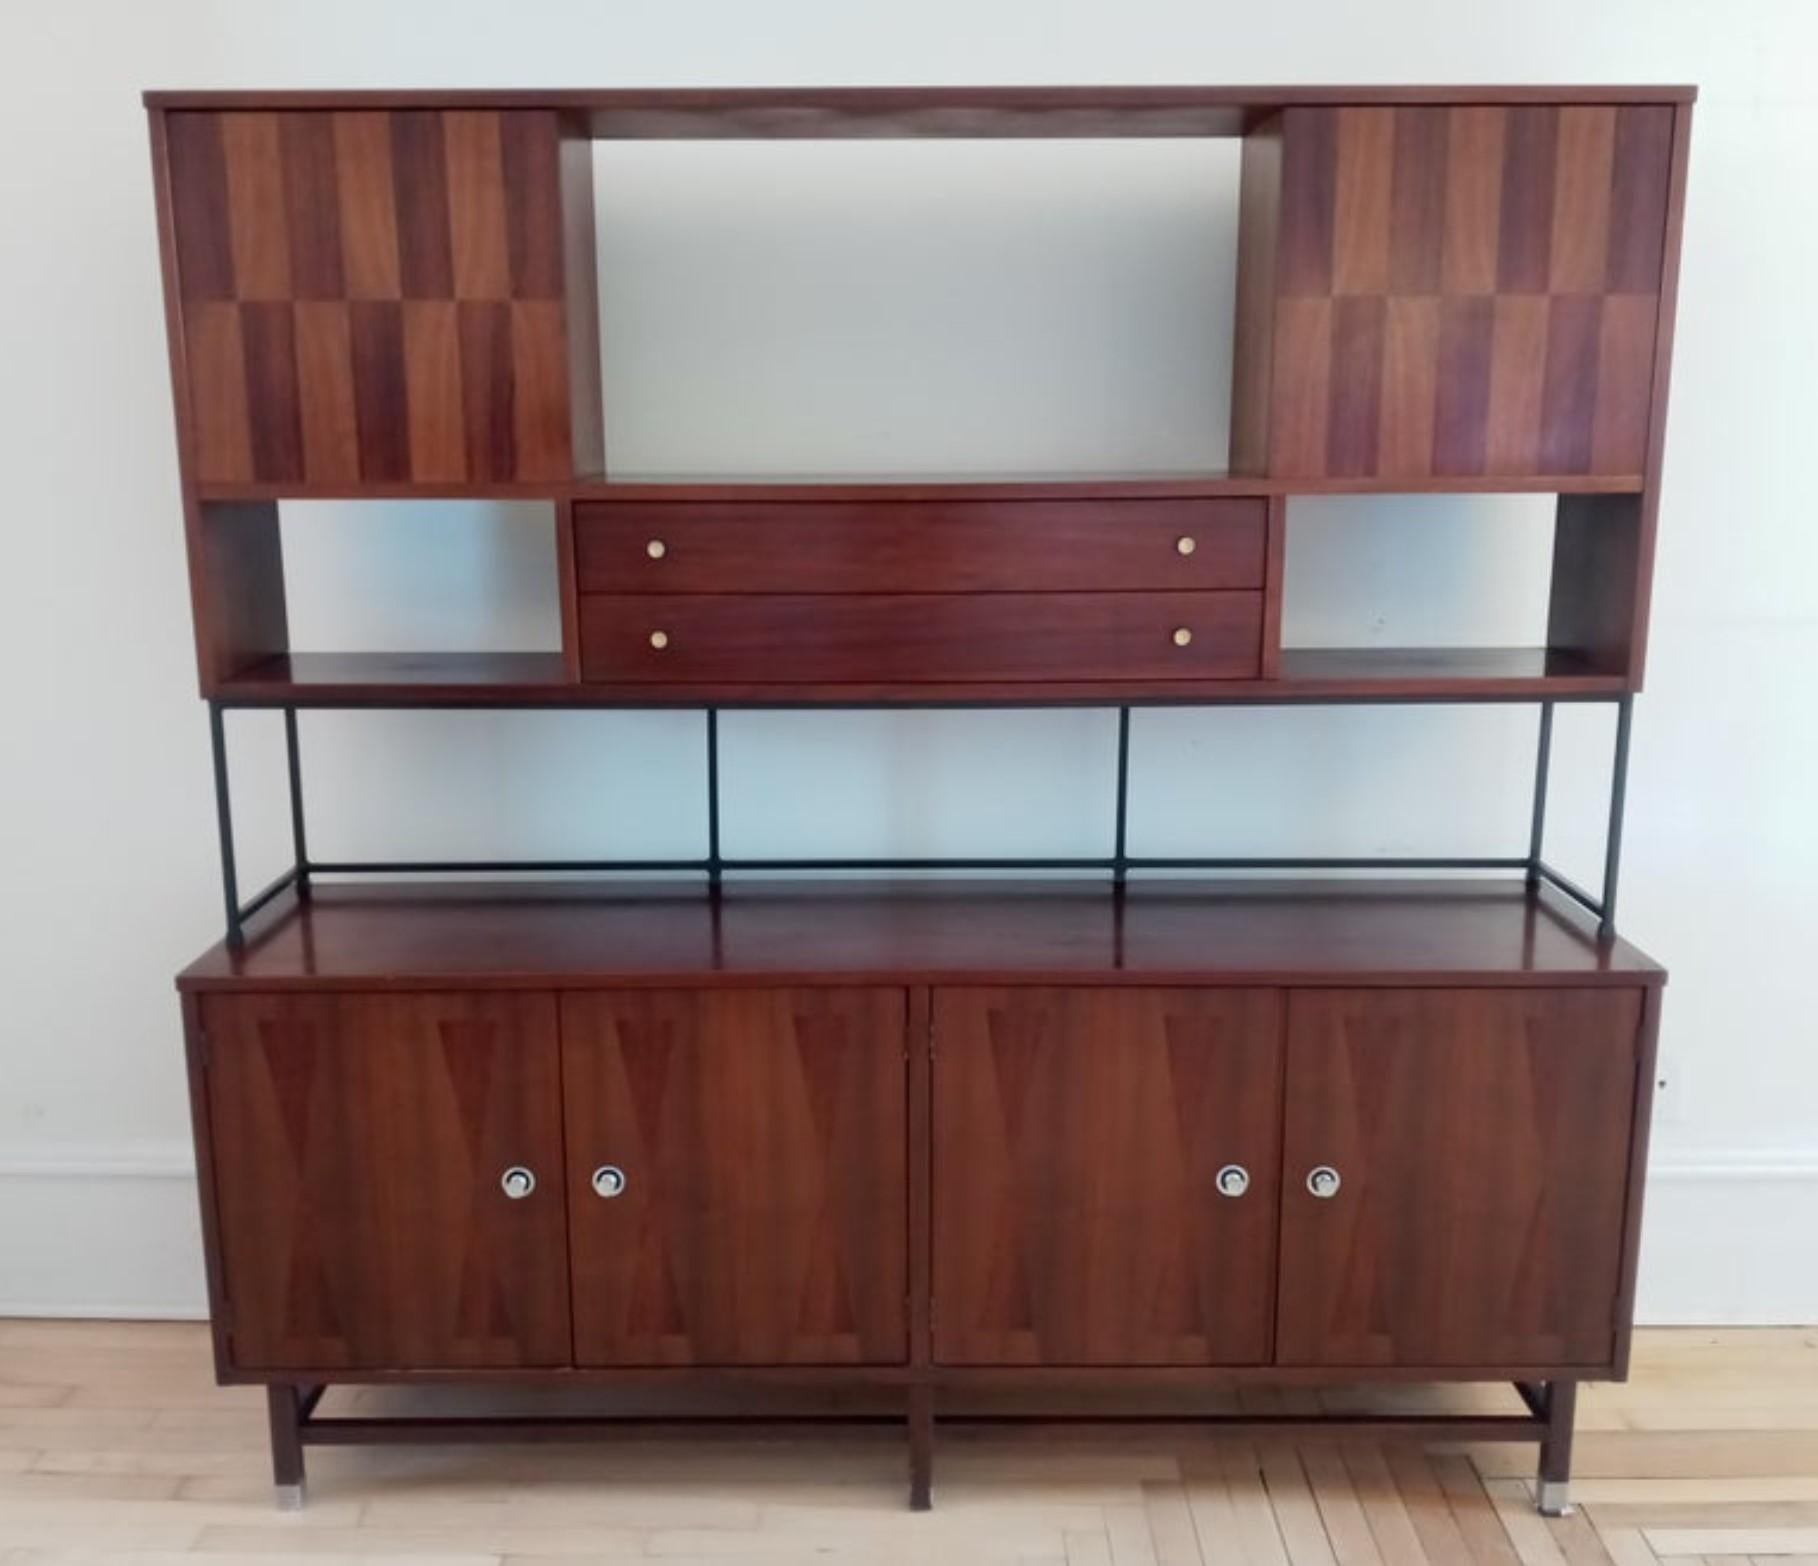 This is a superb Mid-Century Modern credenza or sideboard by Stanley. It is mostly walnut with geometric rosewood inlays on the fronts and has turned aluminum pulls. The lower cabinet has one shelf on the left and three drawers on the right, the top